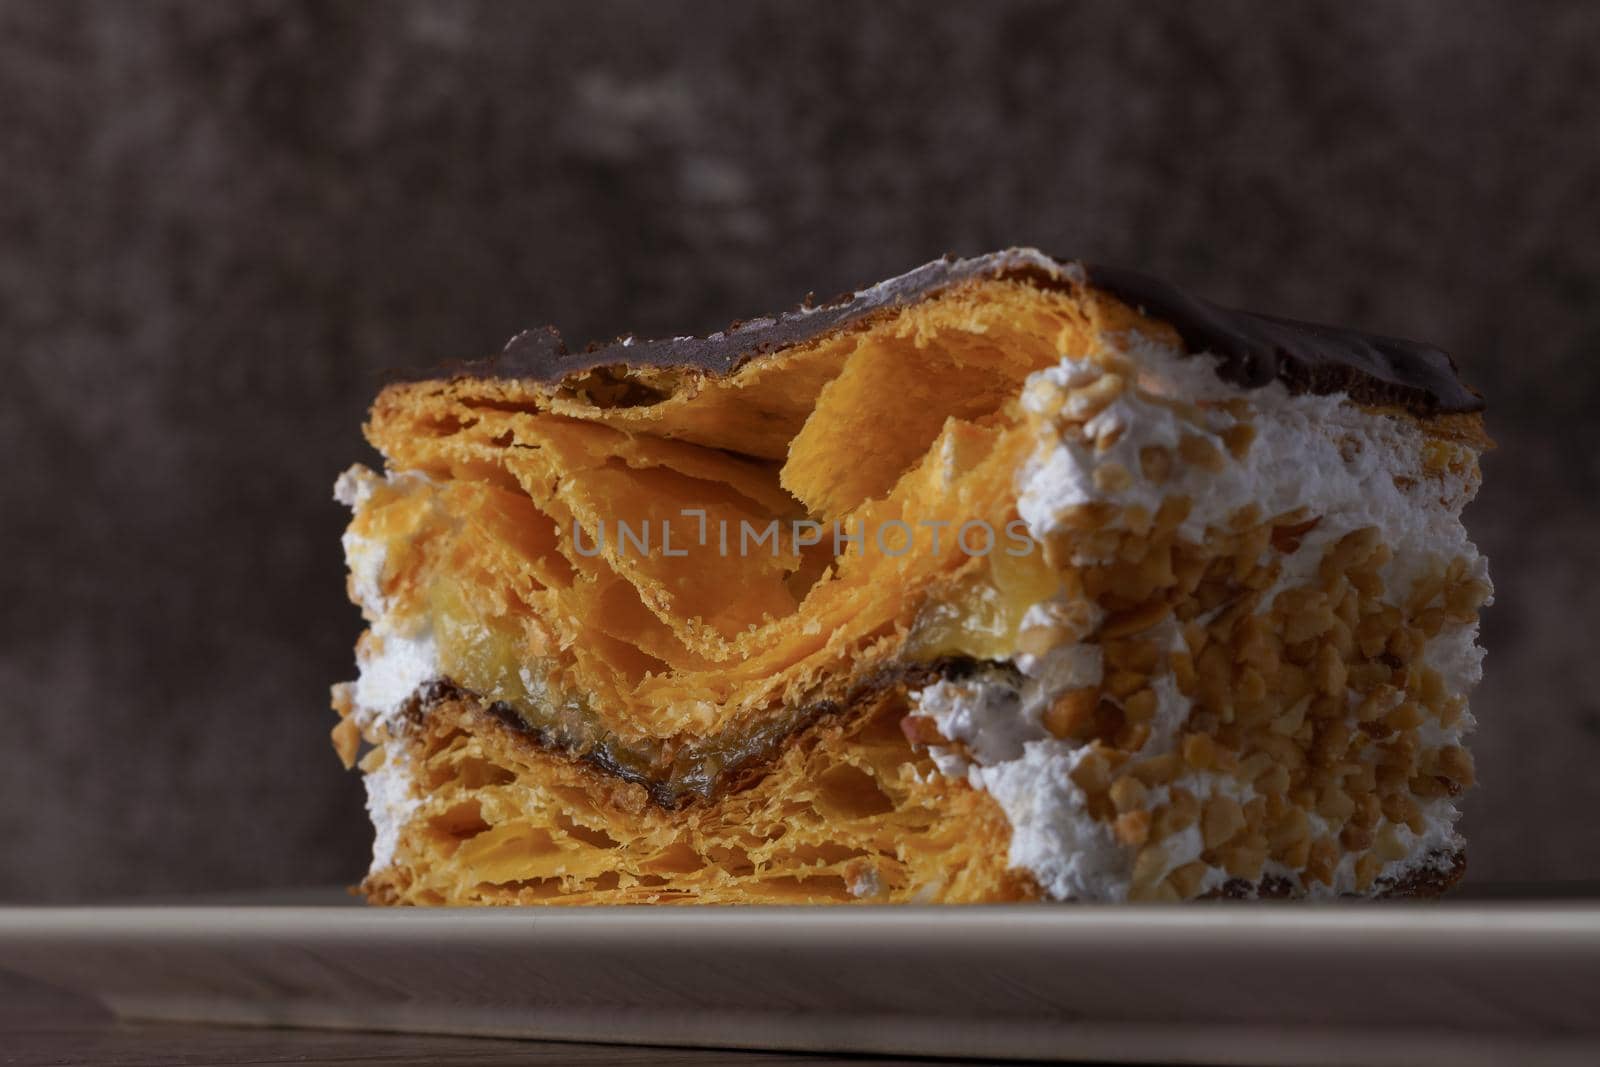 close-up of a chocolate-covered puff pastry with cream and almonds by joseantona